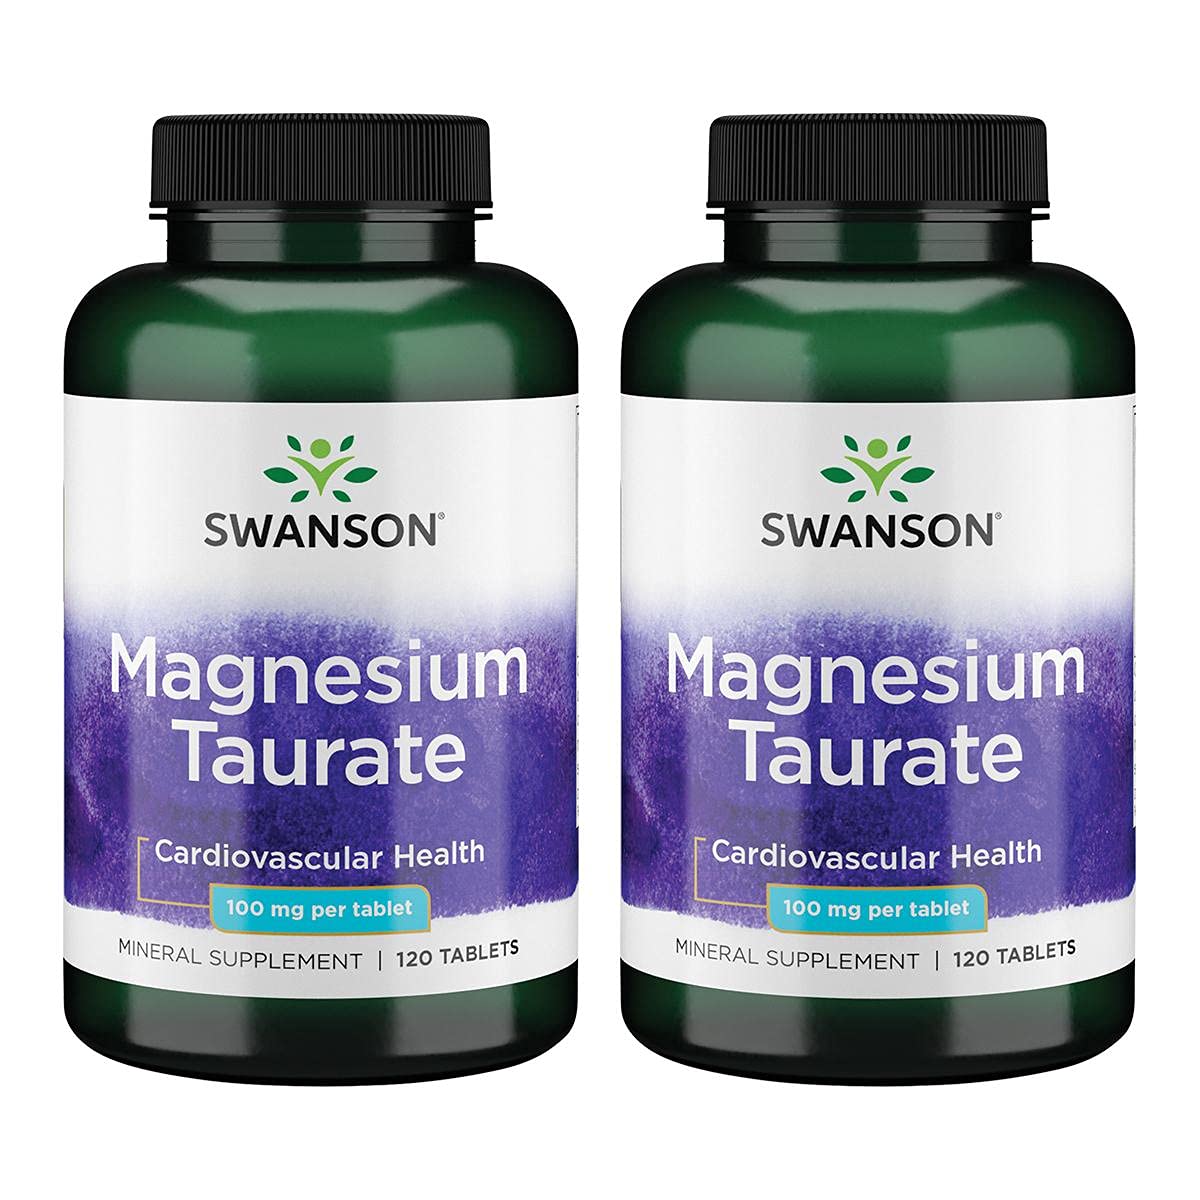 Swanson Magnesium Taurate - Mineral Supplement Promoting Muscle & Bone Health - Natural Magnesium & Taurine Formula Supporting Heart Health - (120 Tablets, 100mg Each) 2 Pack